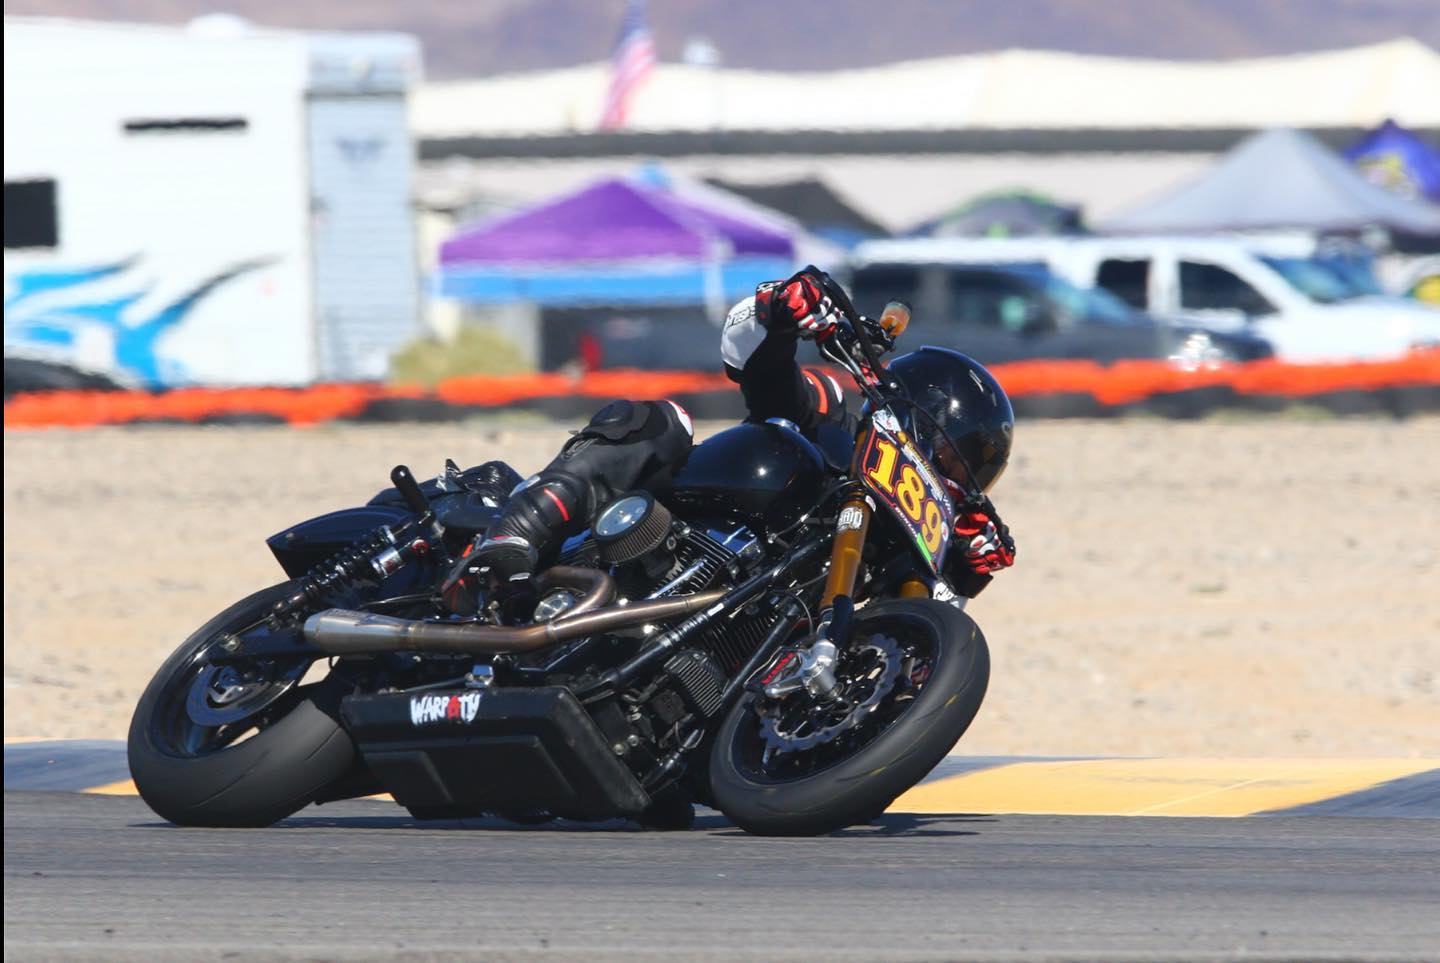 SMT sponsors V-Twin Racing and Bagger Racing League